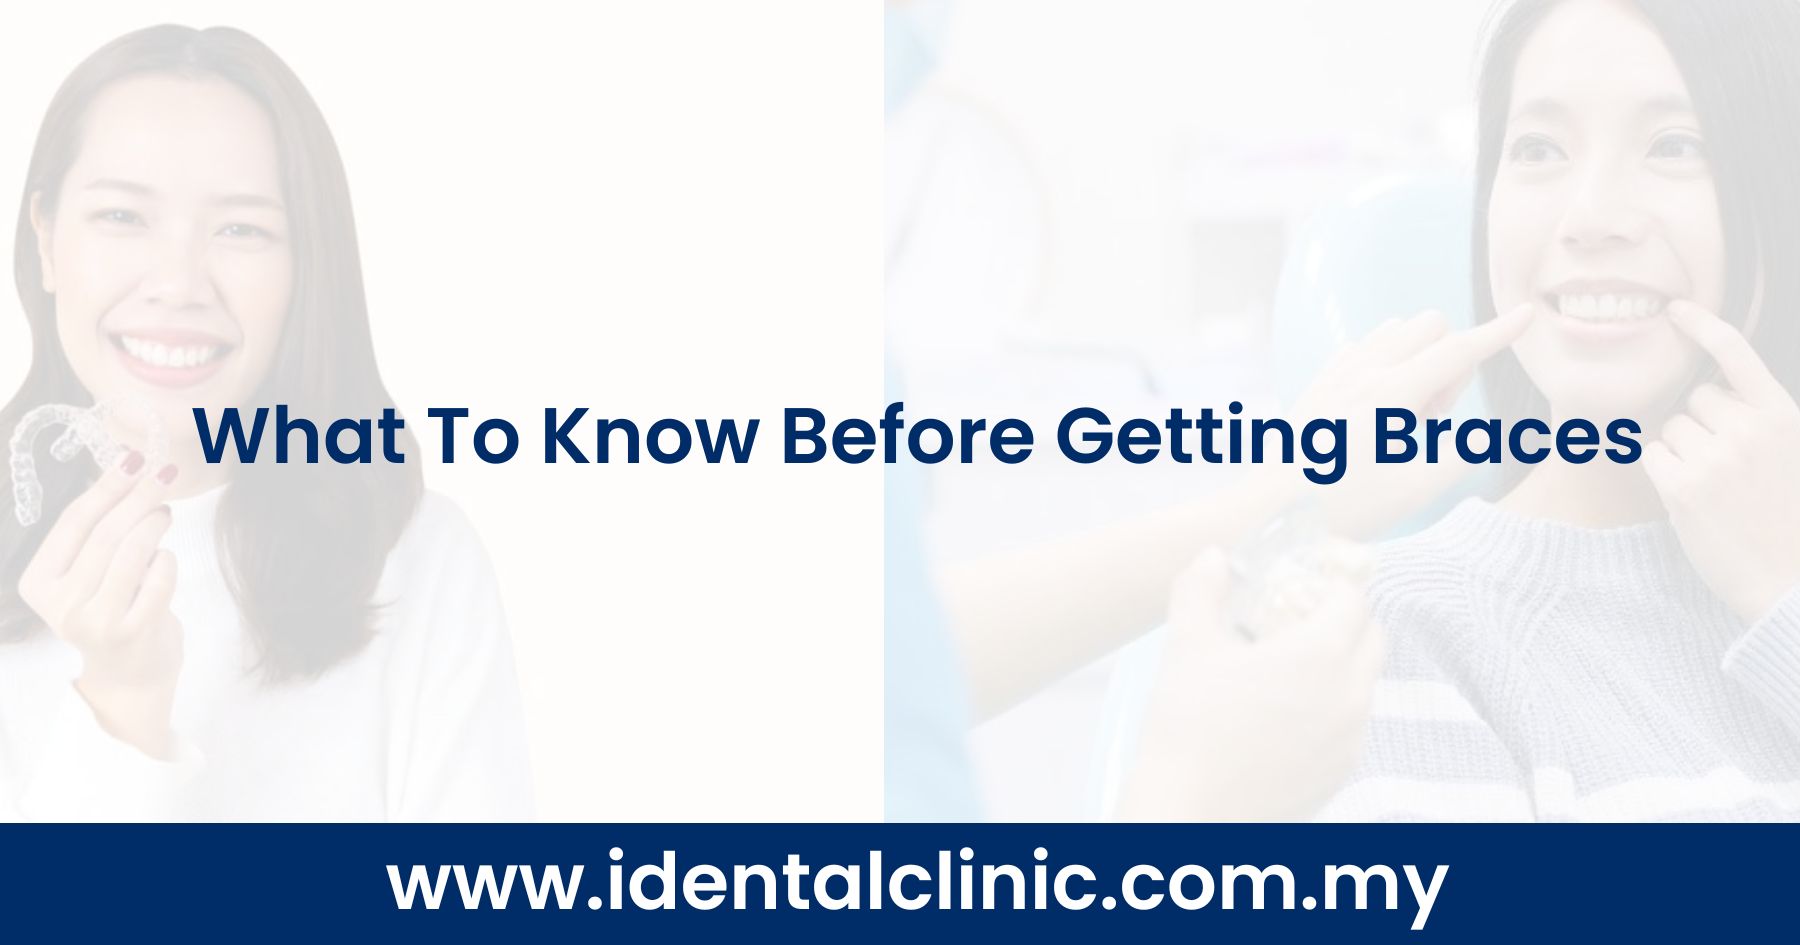 What To Know Before Getting Braces